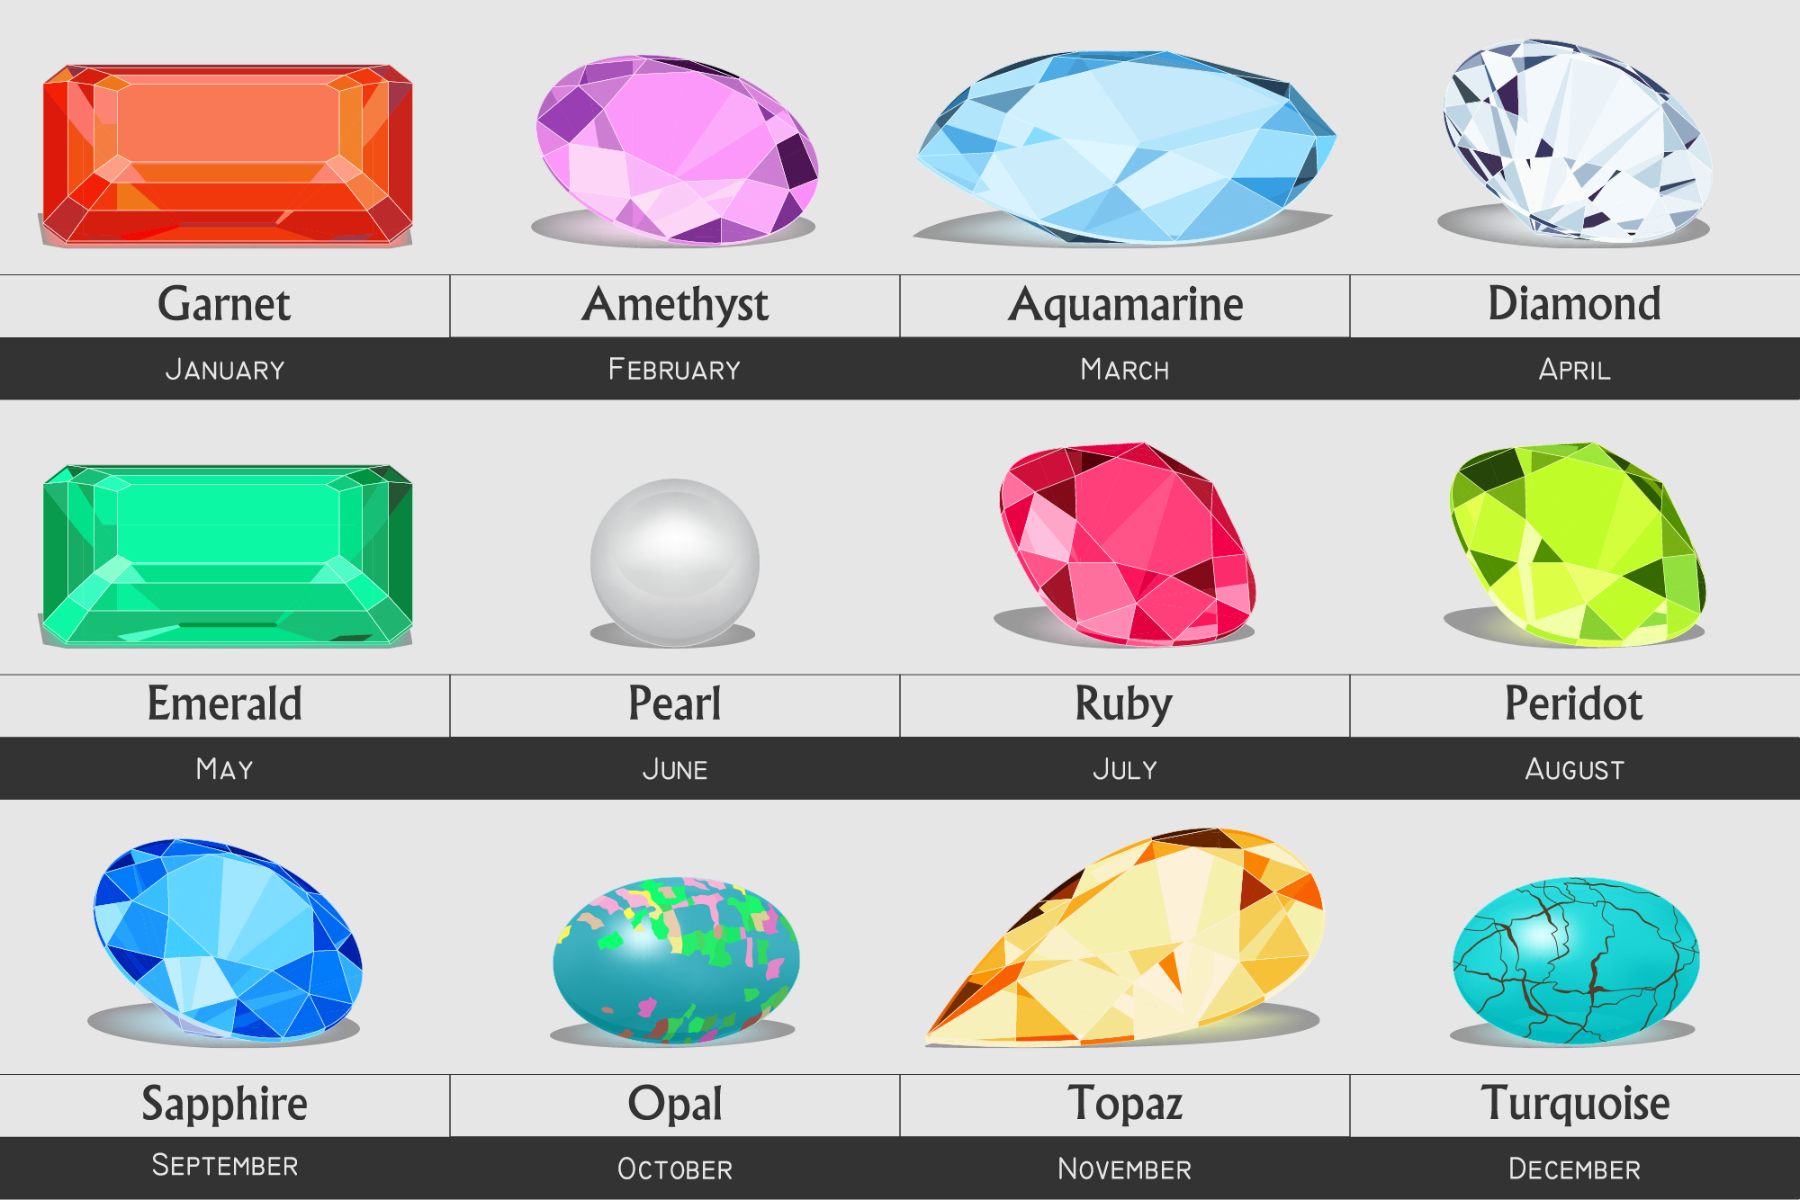 An image featuring the twelve birthstones, each one representing a different month